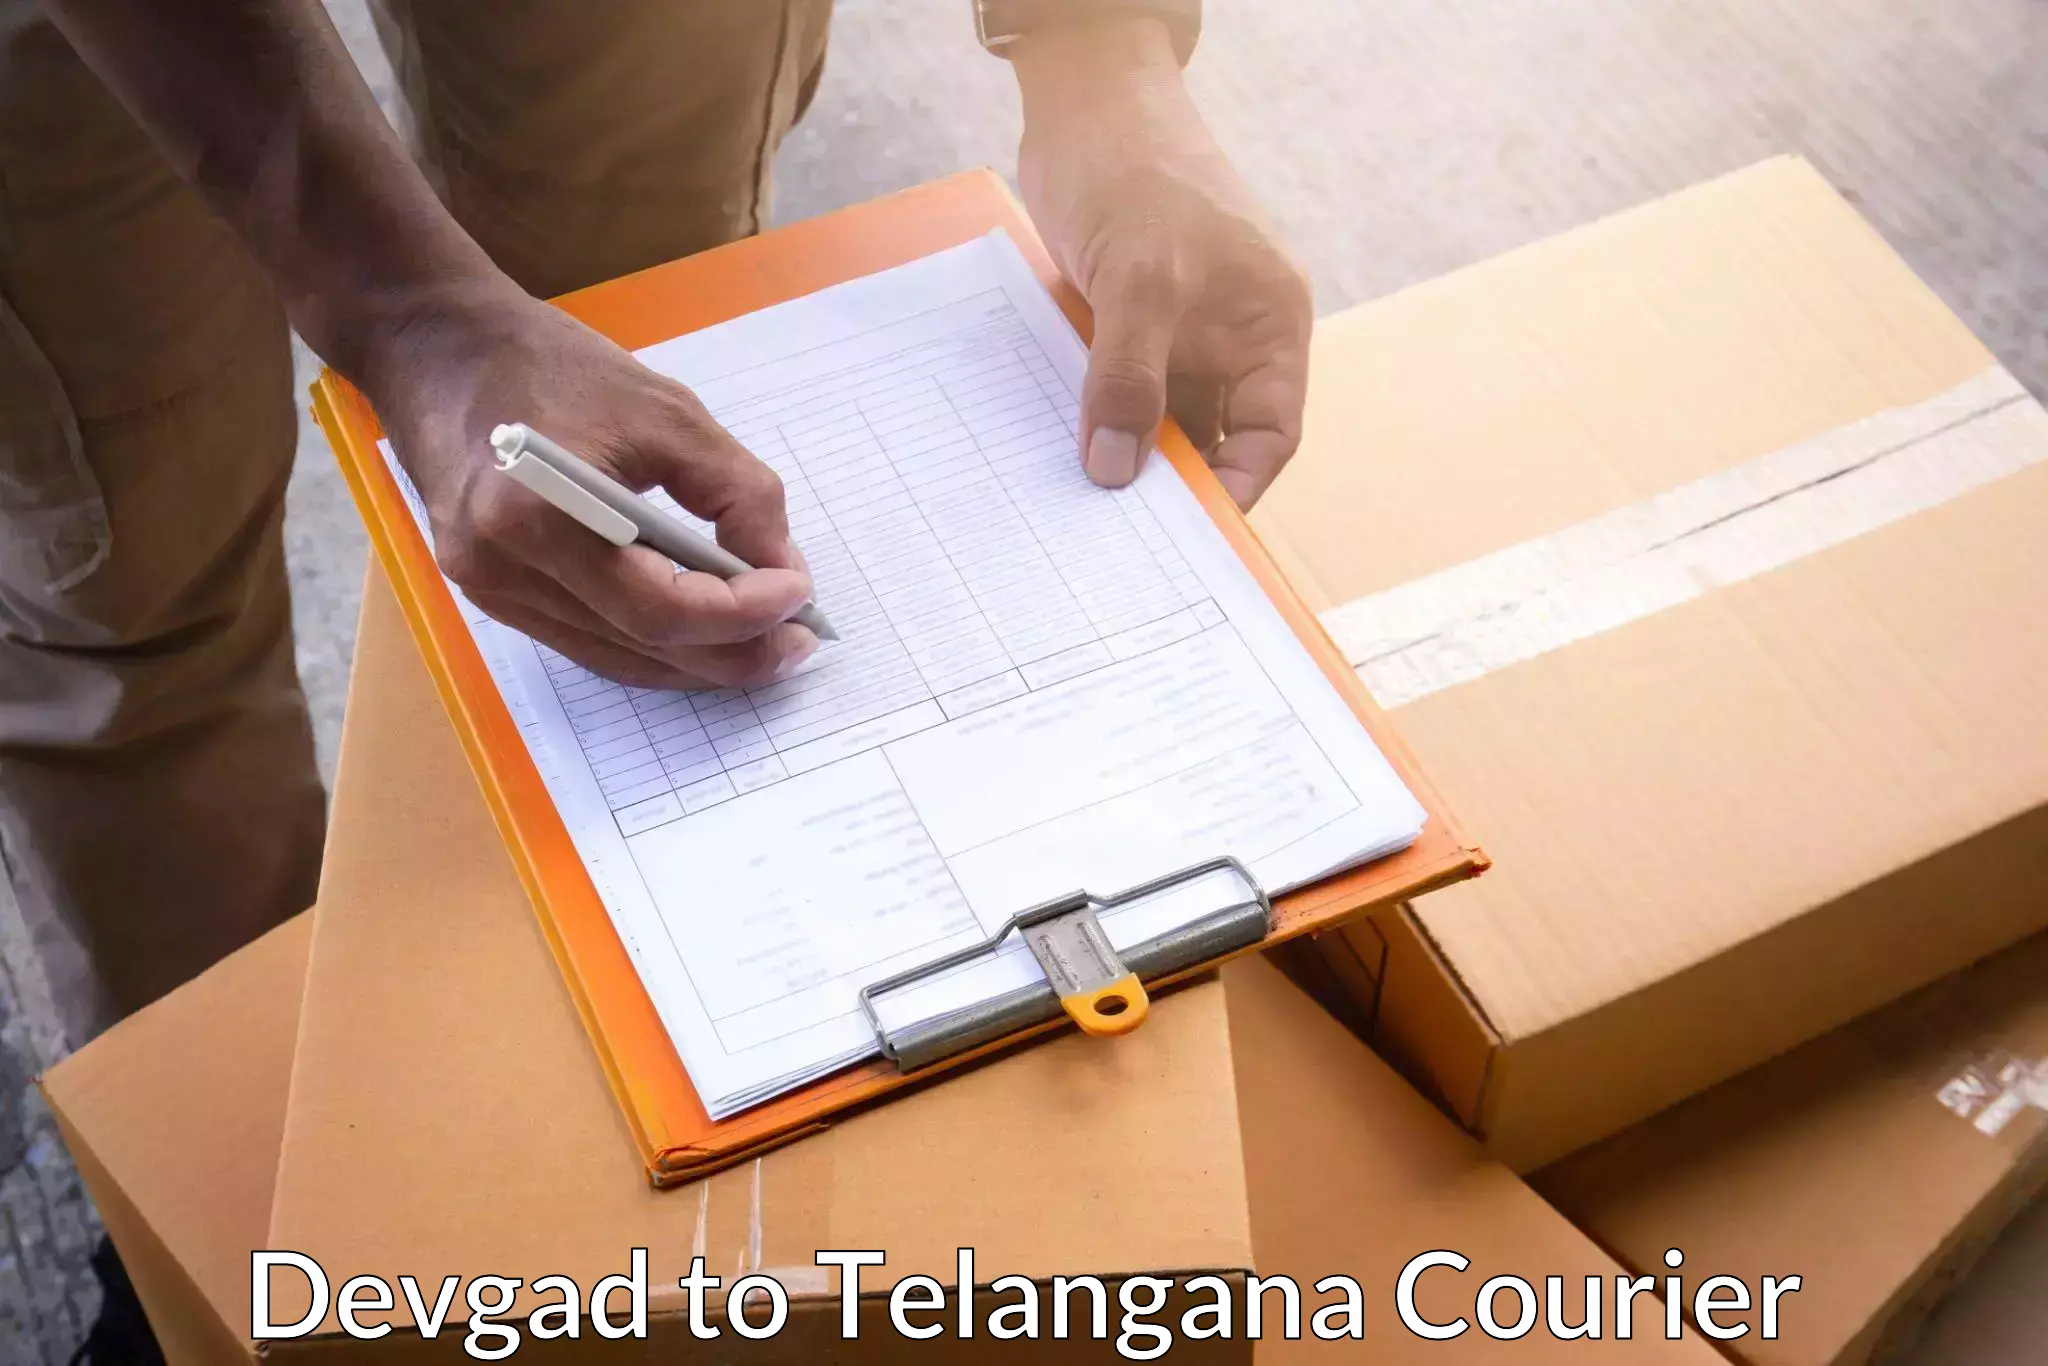 Flexible delivery schedules in Devgad to Warangal